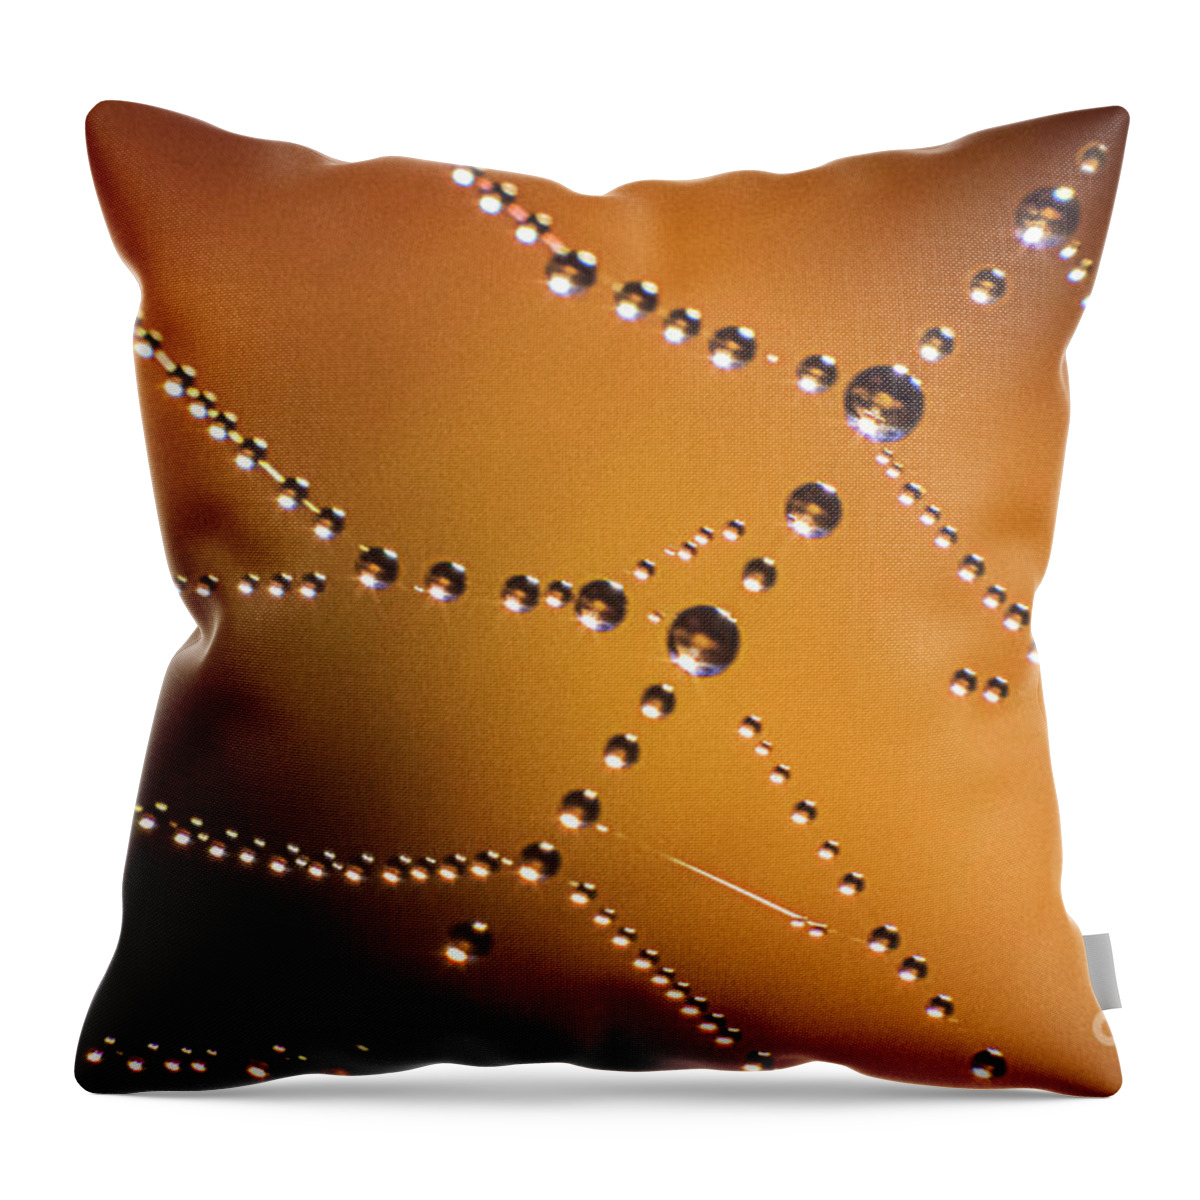 Dew Throw Pillow featuring the photograph Cobweb with Dew Drops by Heiko Koehrer-Wagner